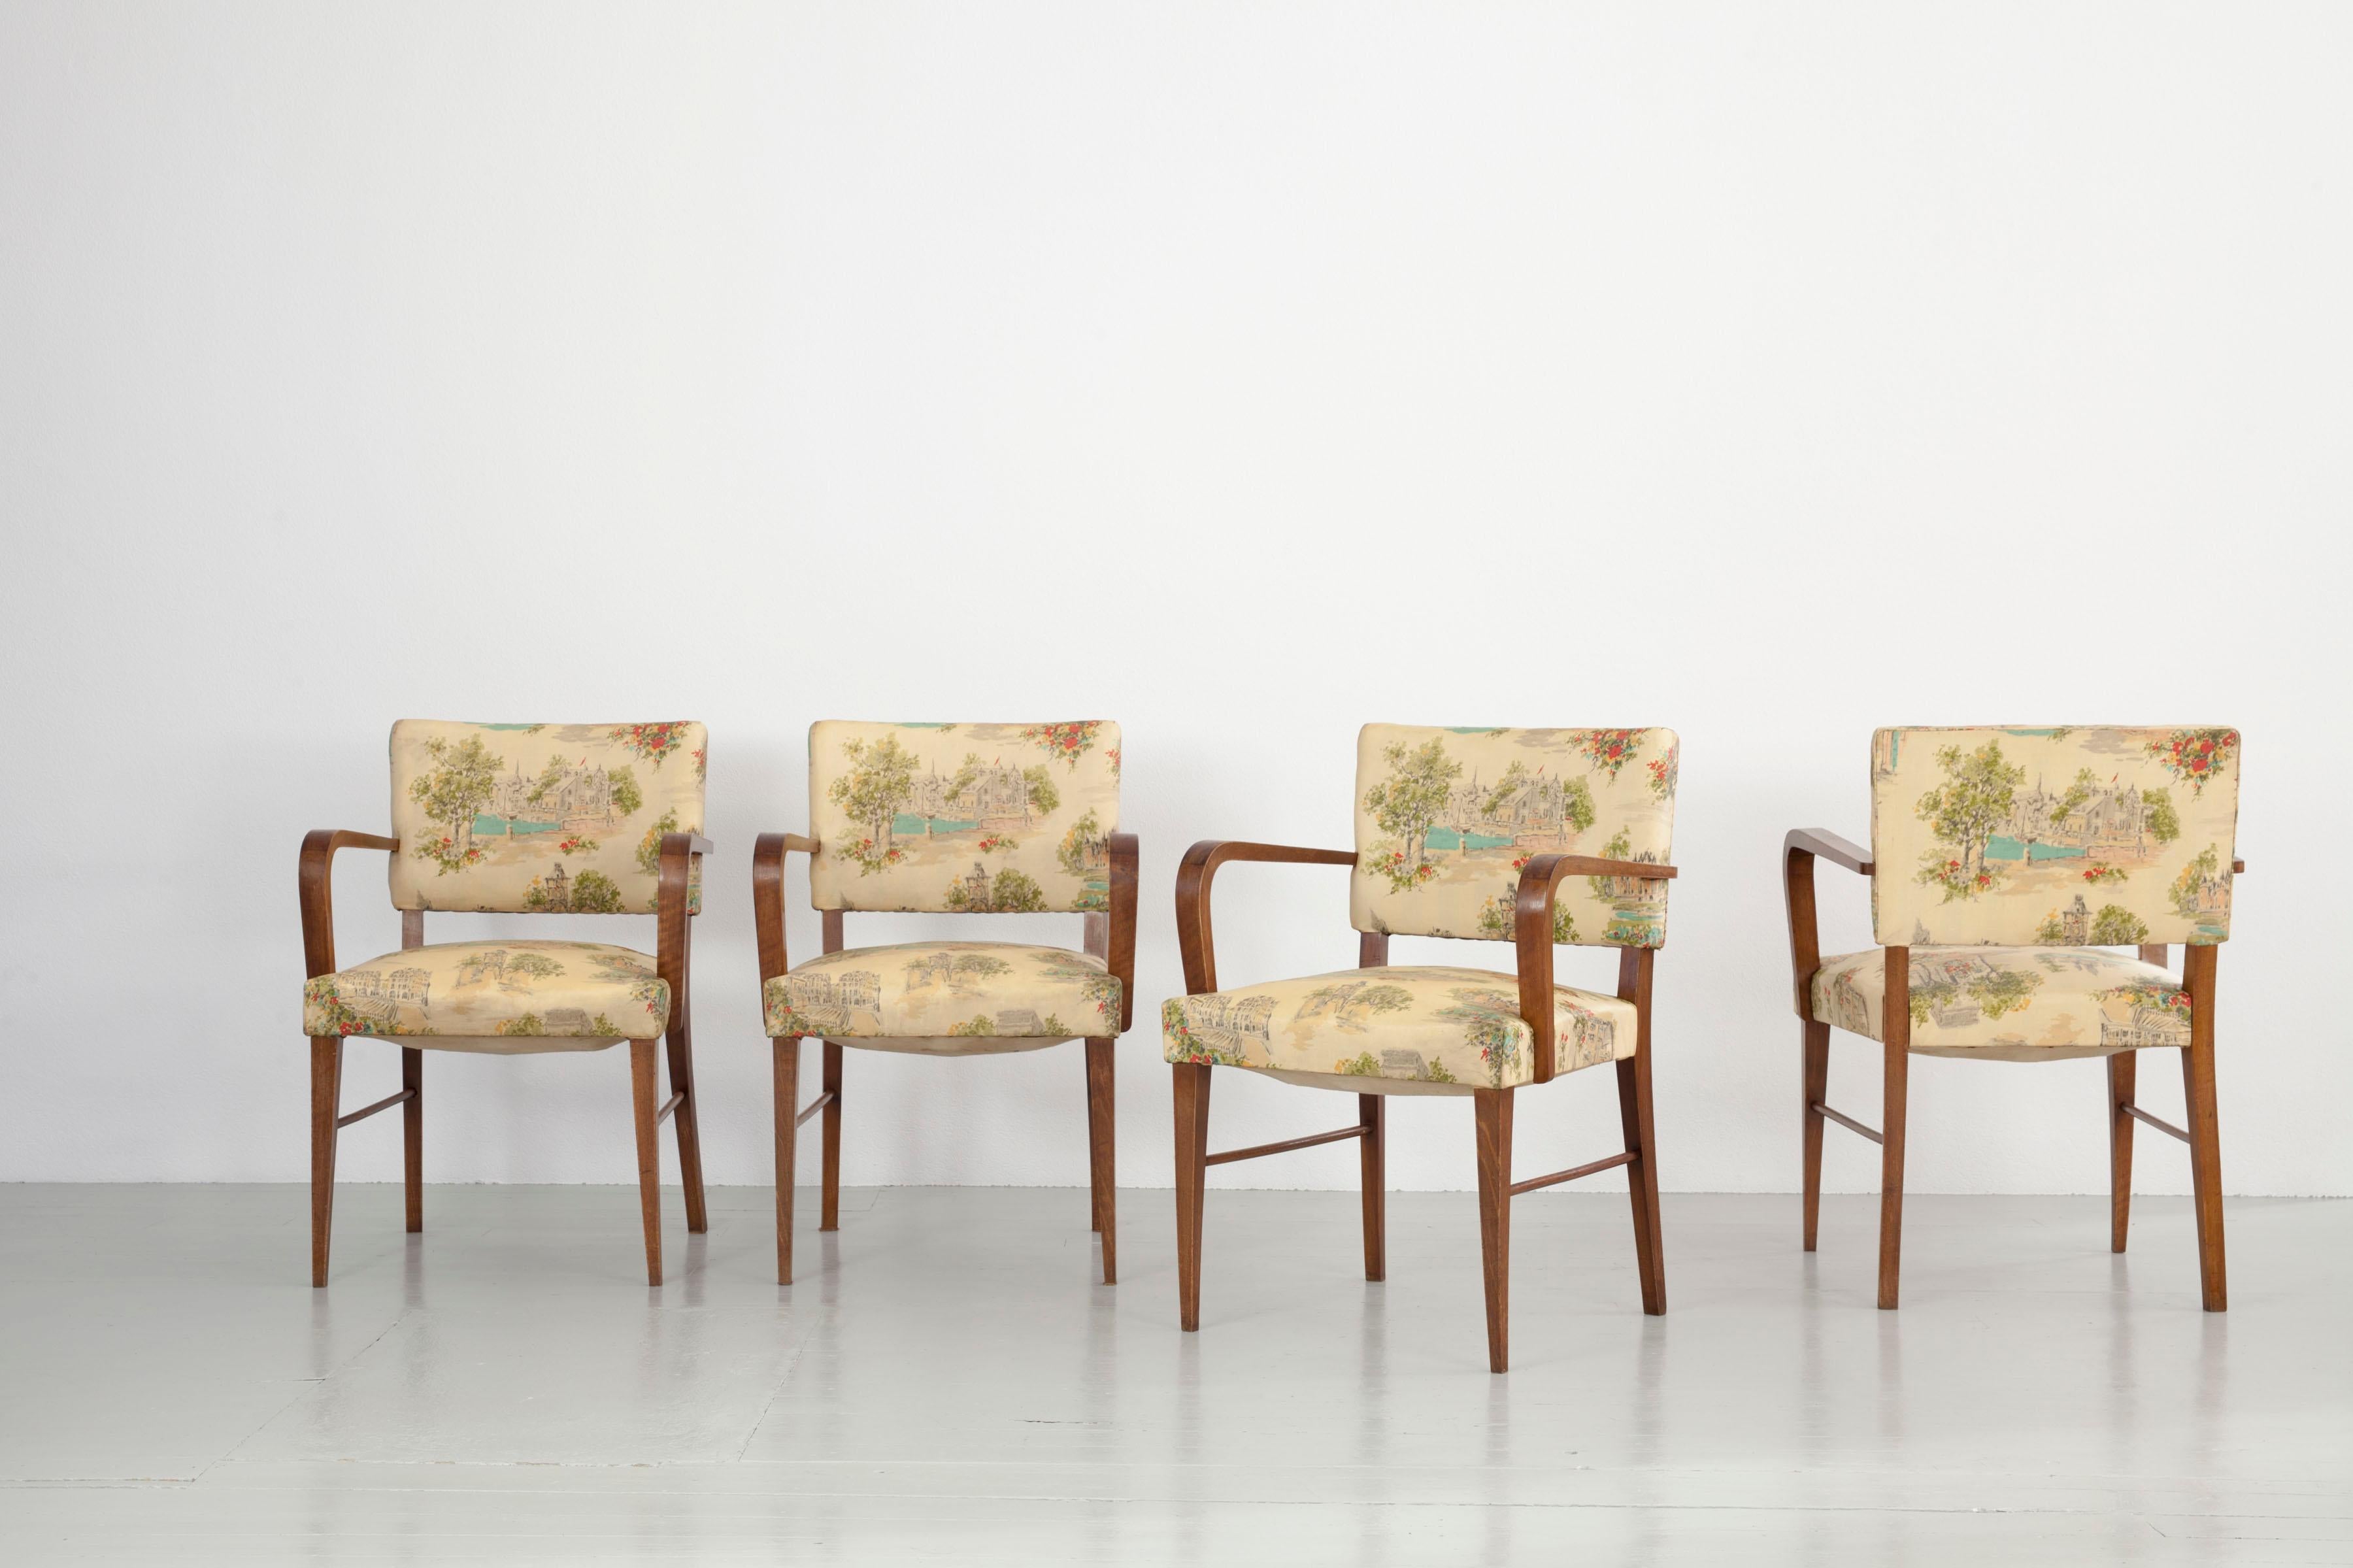 This set of four armchairs was made in Italy in the 1930s. The chair frame is made of oak and the seat and back are covered in chintz. The beige chintz fabric is printed with colourful landscape motifs. All chairs are in good vintage condition.

Do